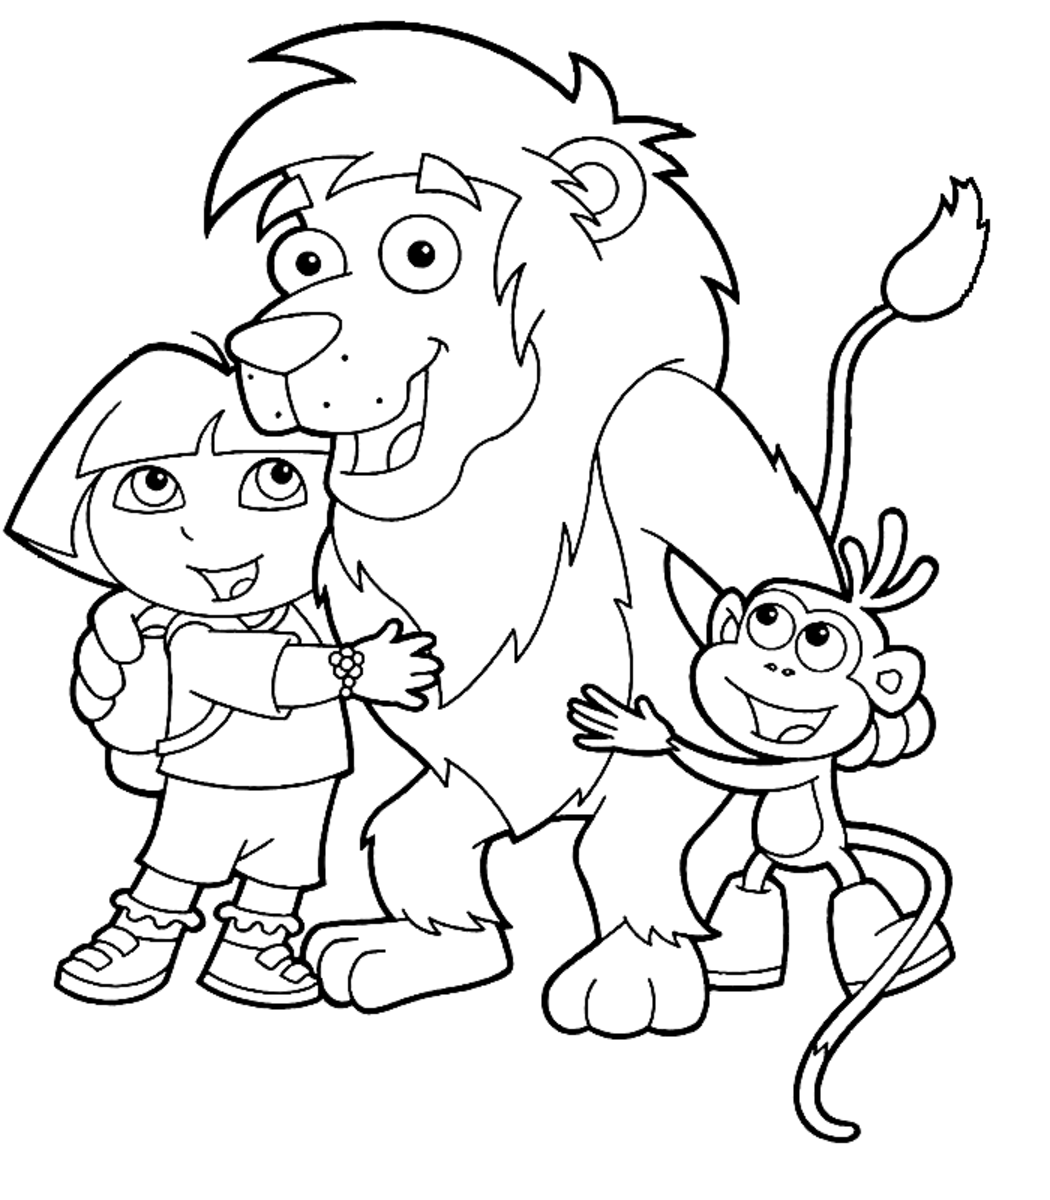 Download Dora the Explorer Printable Coloring Pages | hubpages